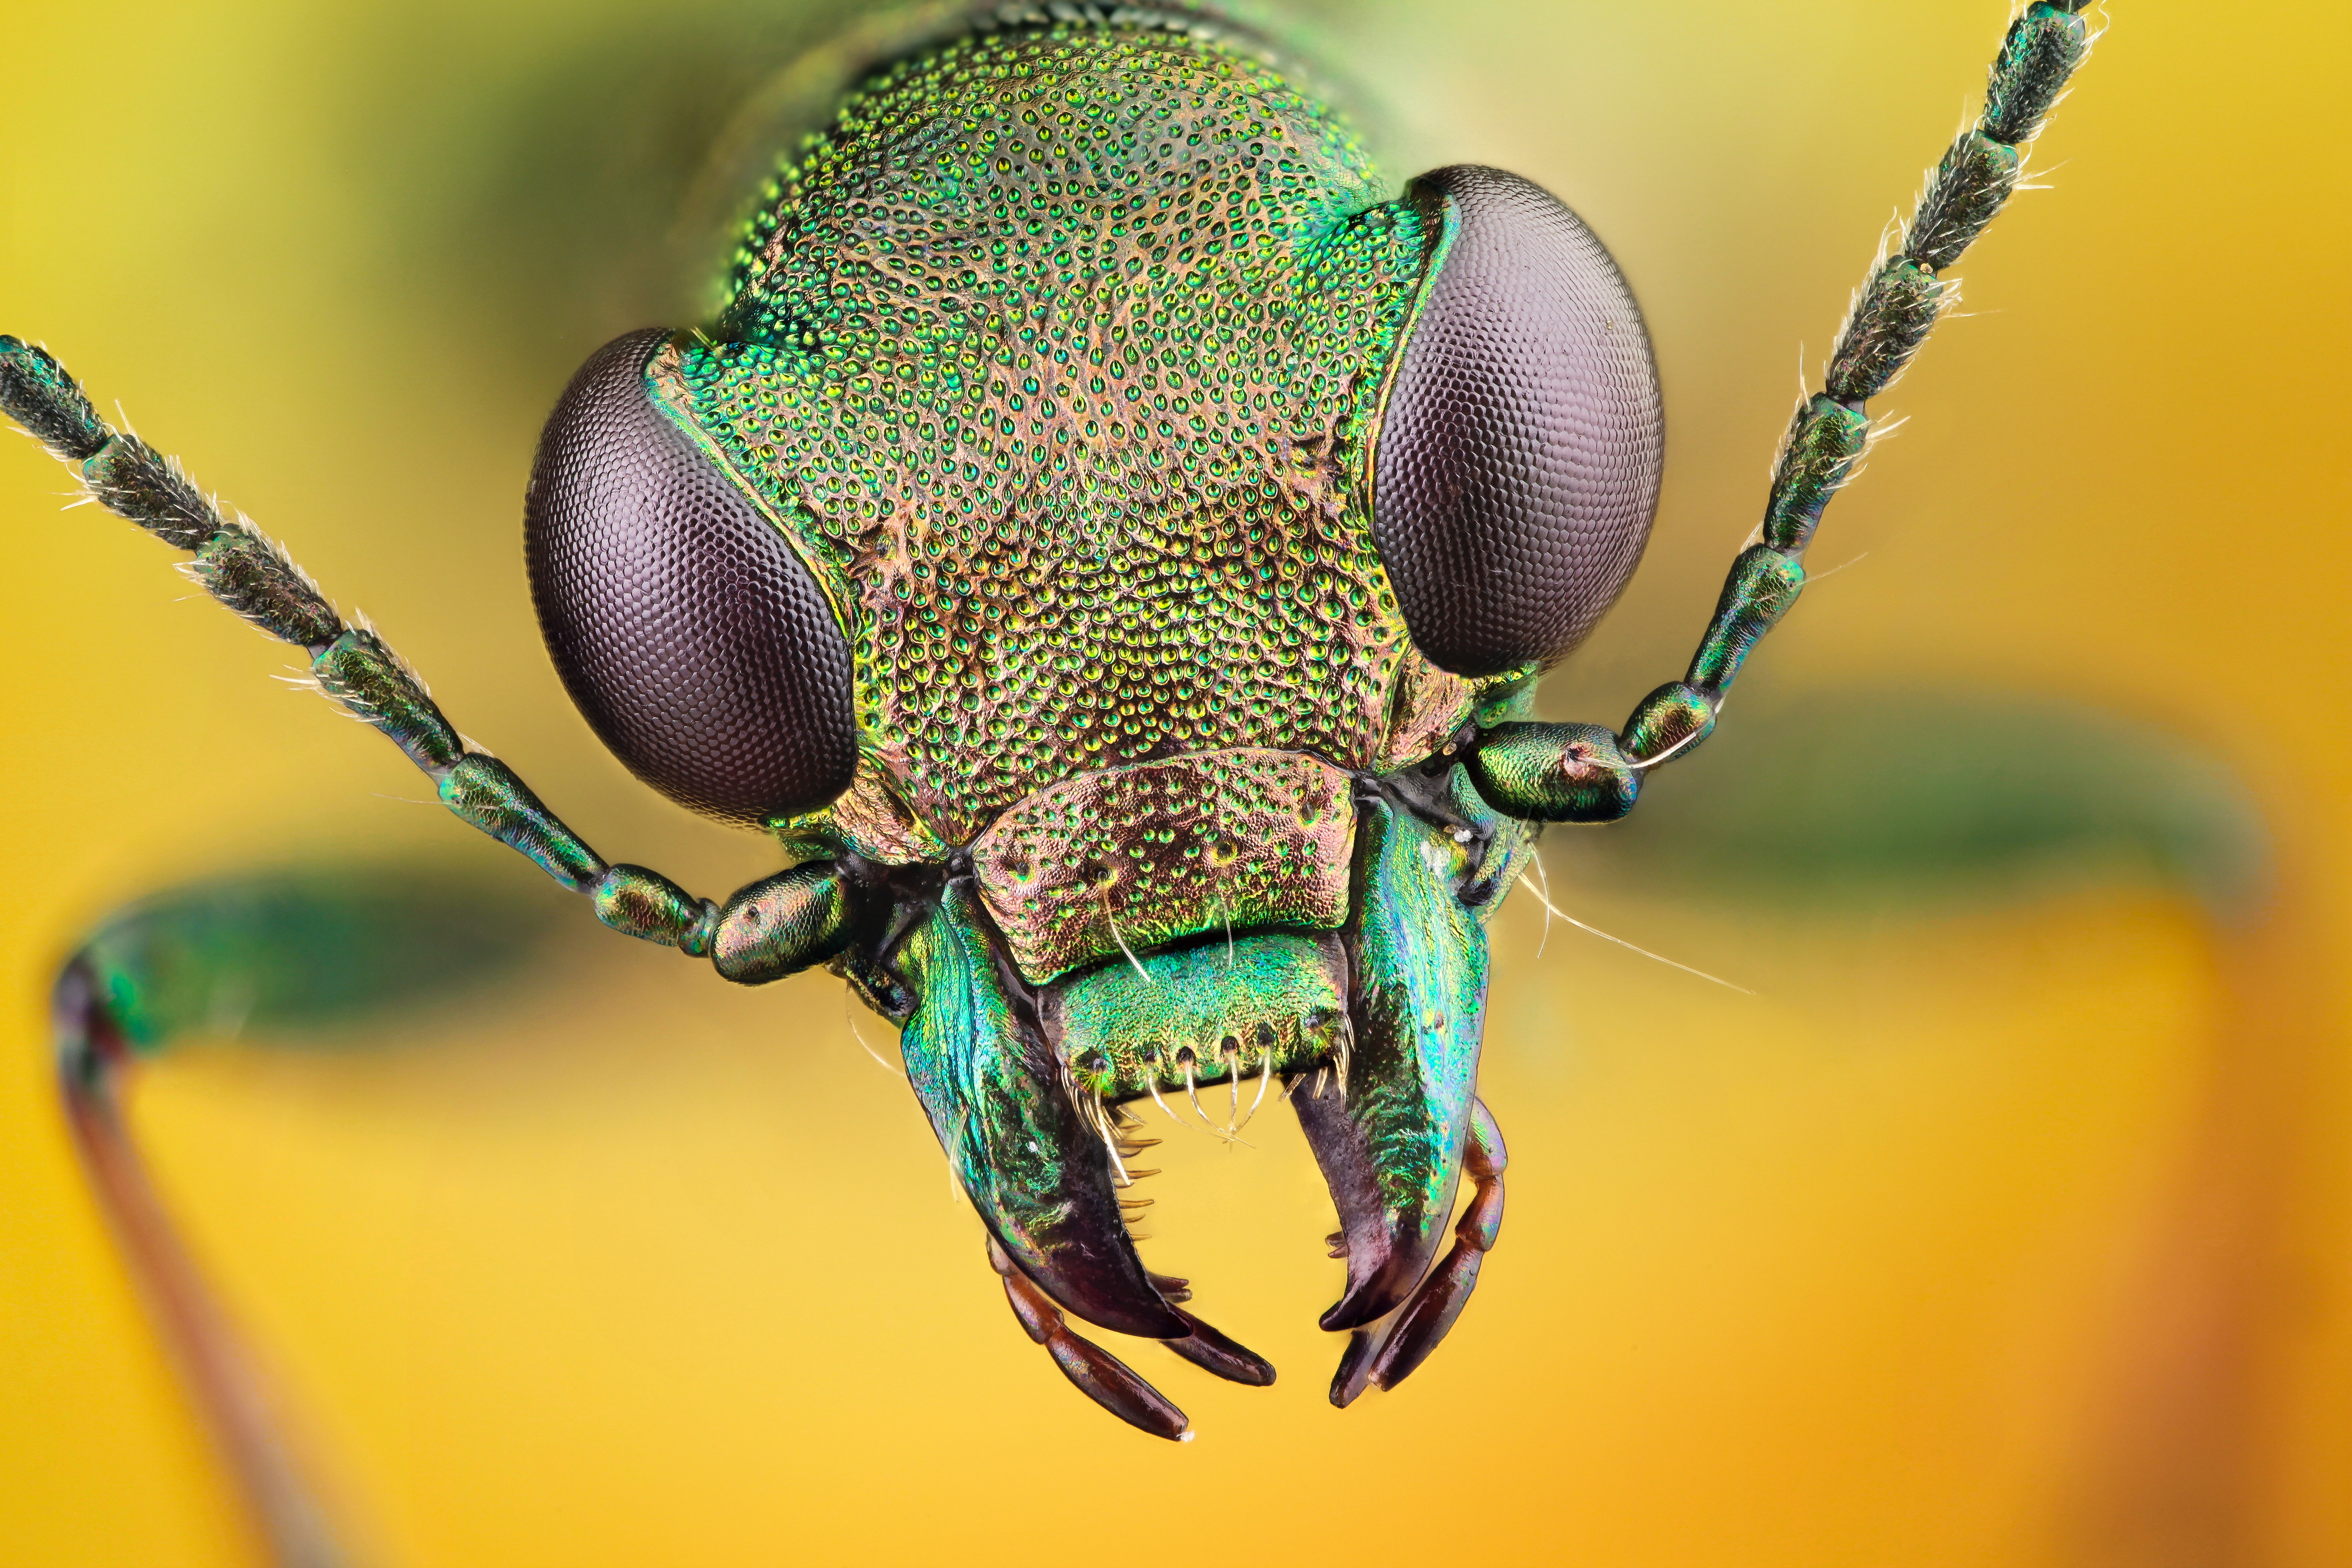 Insect hd papers and backgrounds